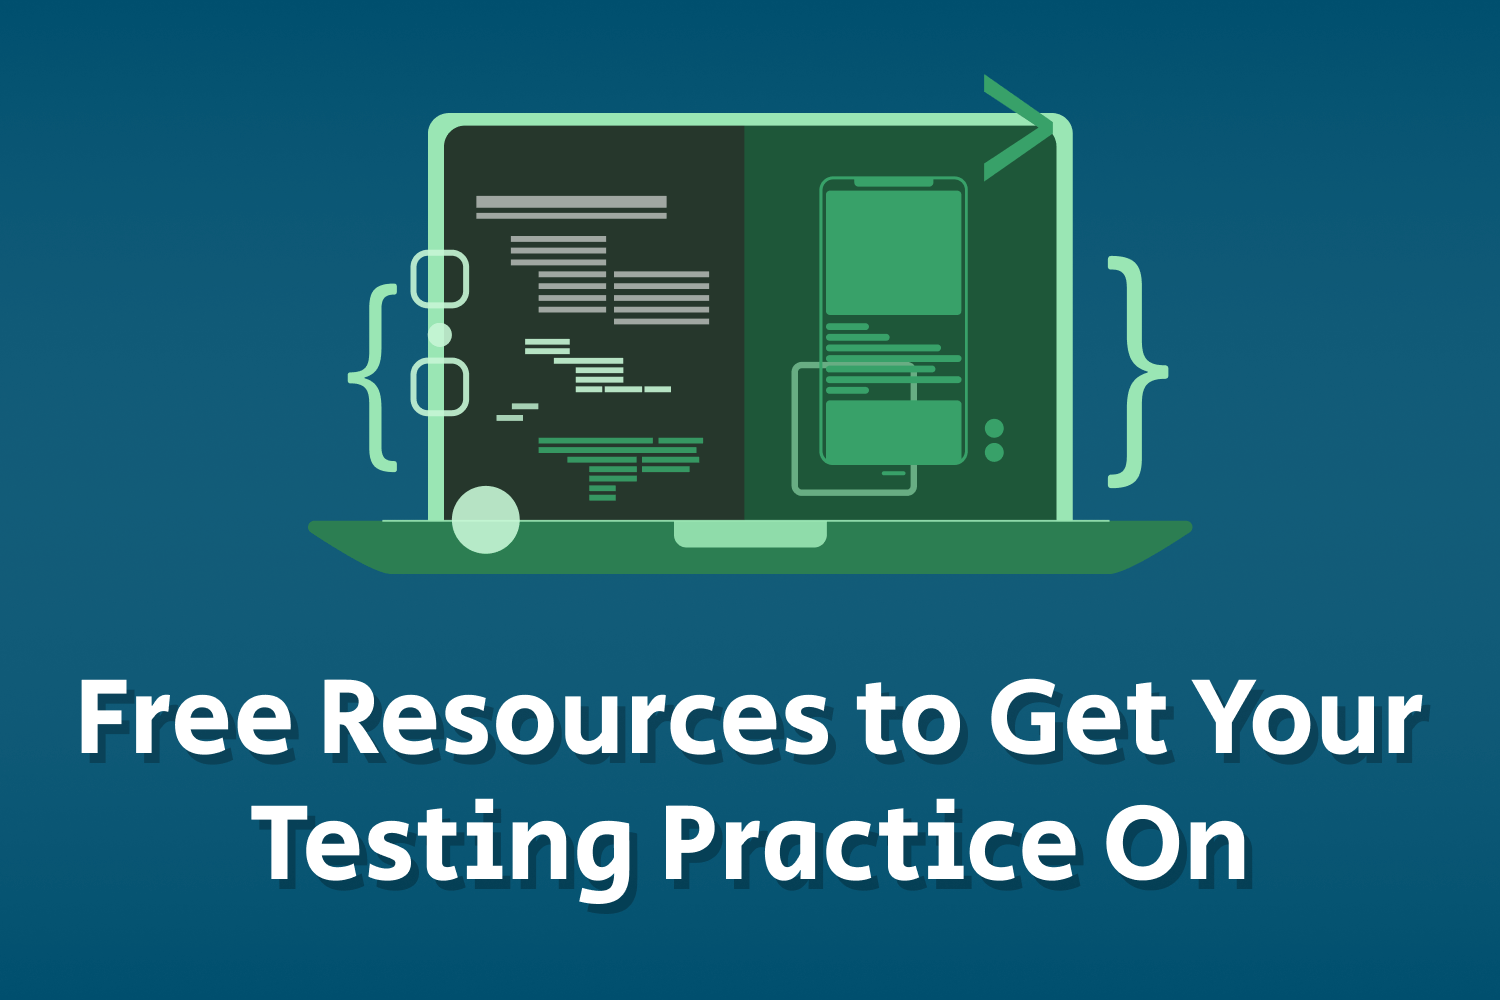 Free Resources to Get Your Testing Practice On